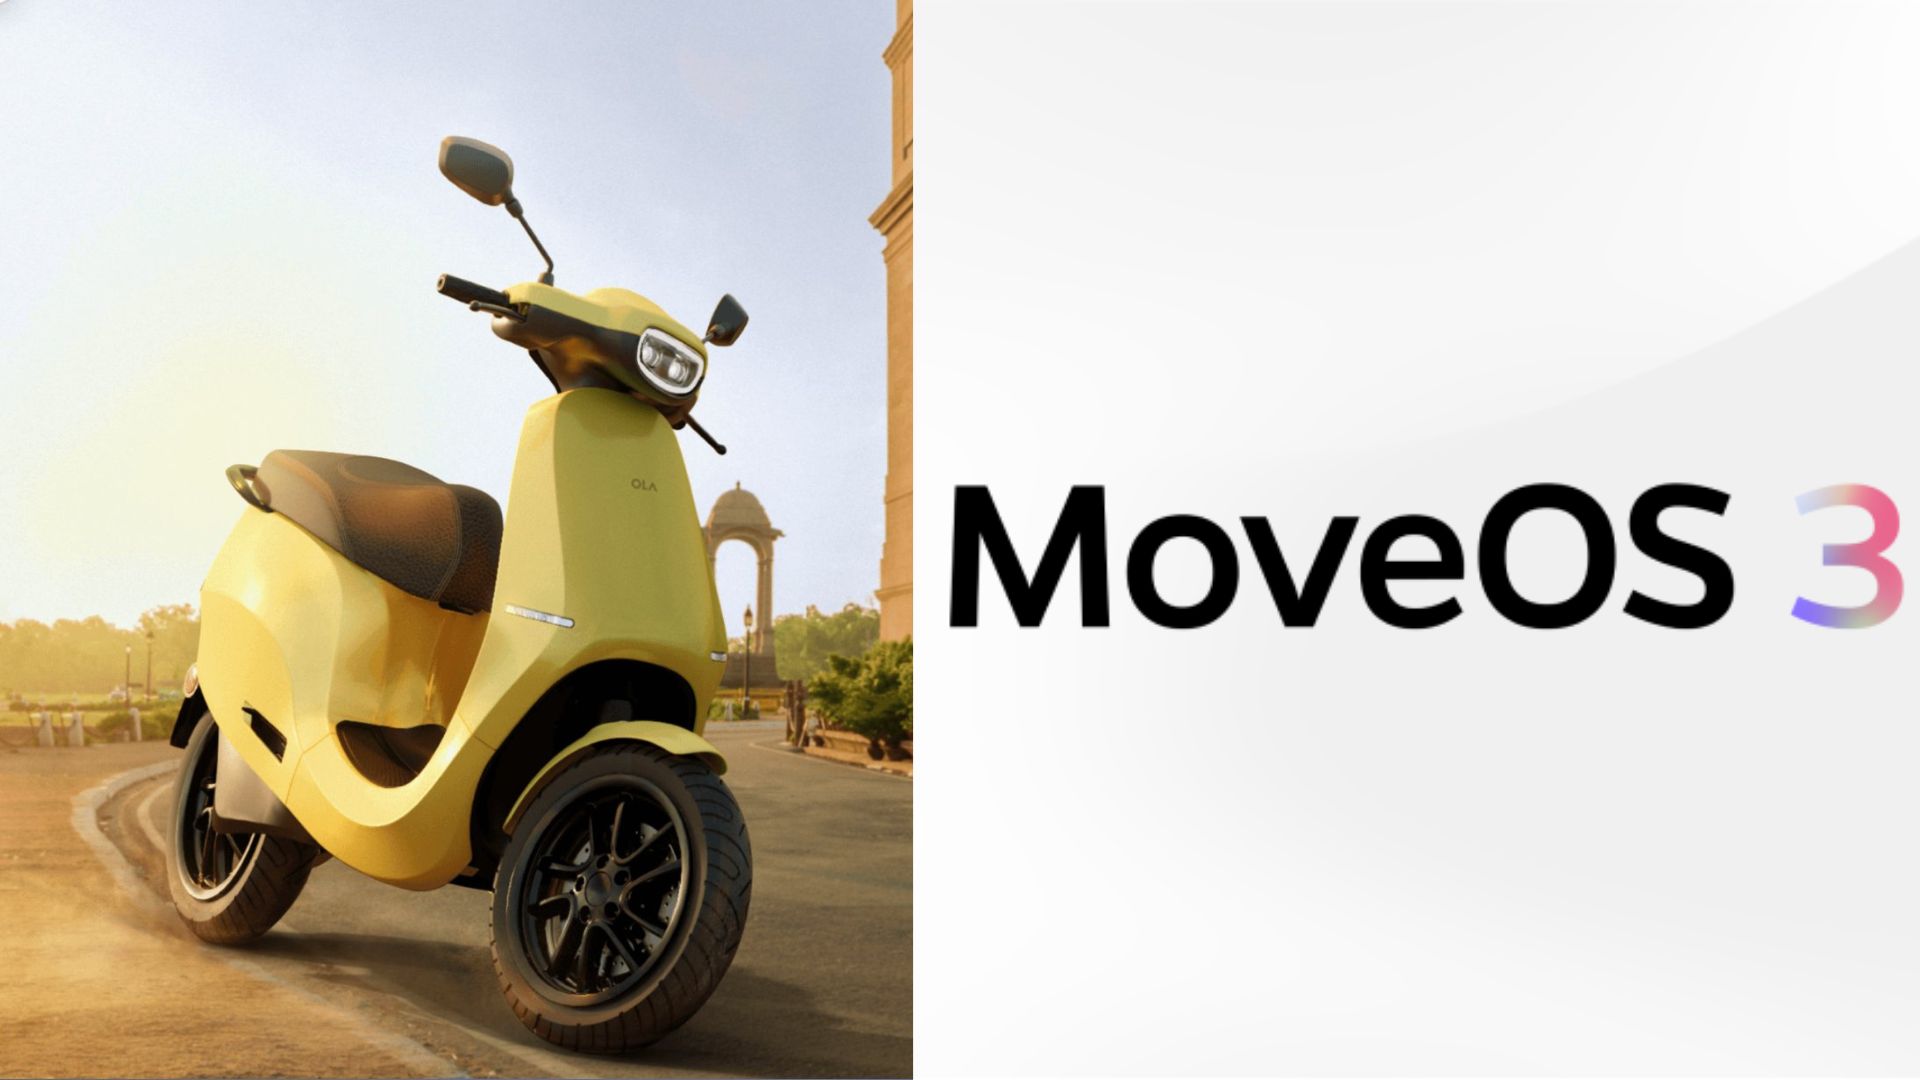 https://e-vehicleinfo.com/ola-introduced-all-new-s1-air-and-moveos-3-update/